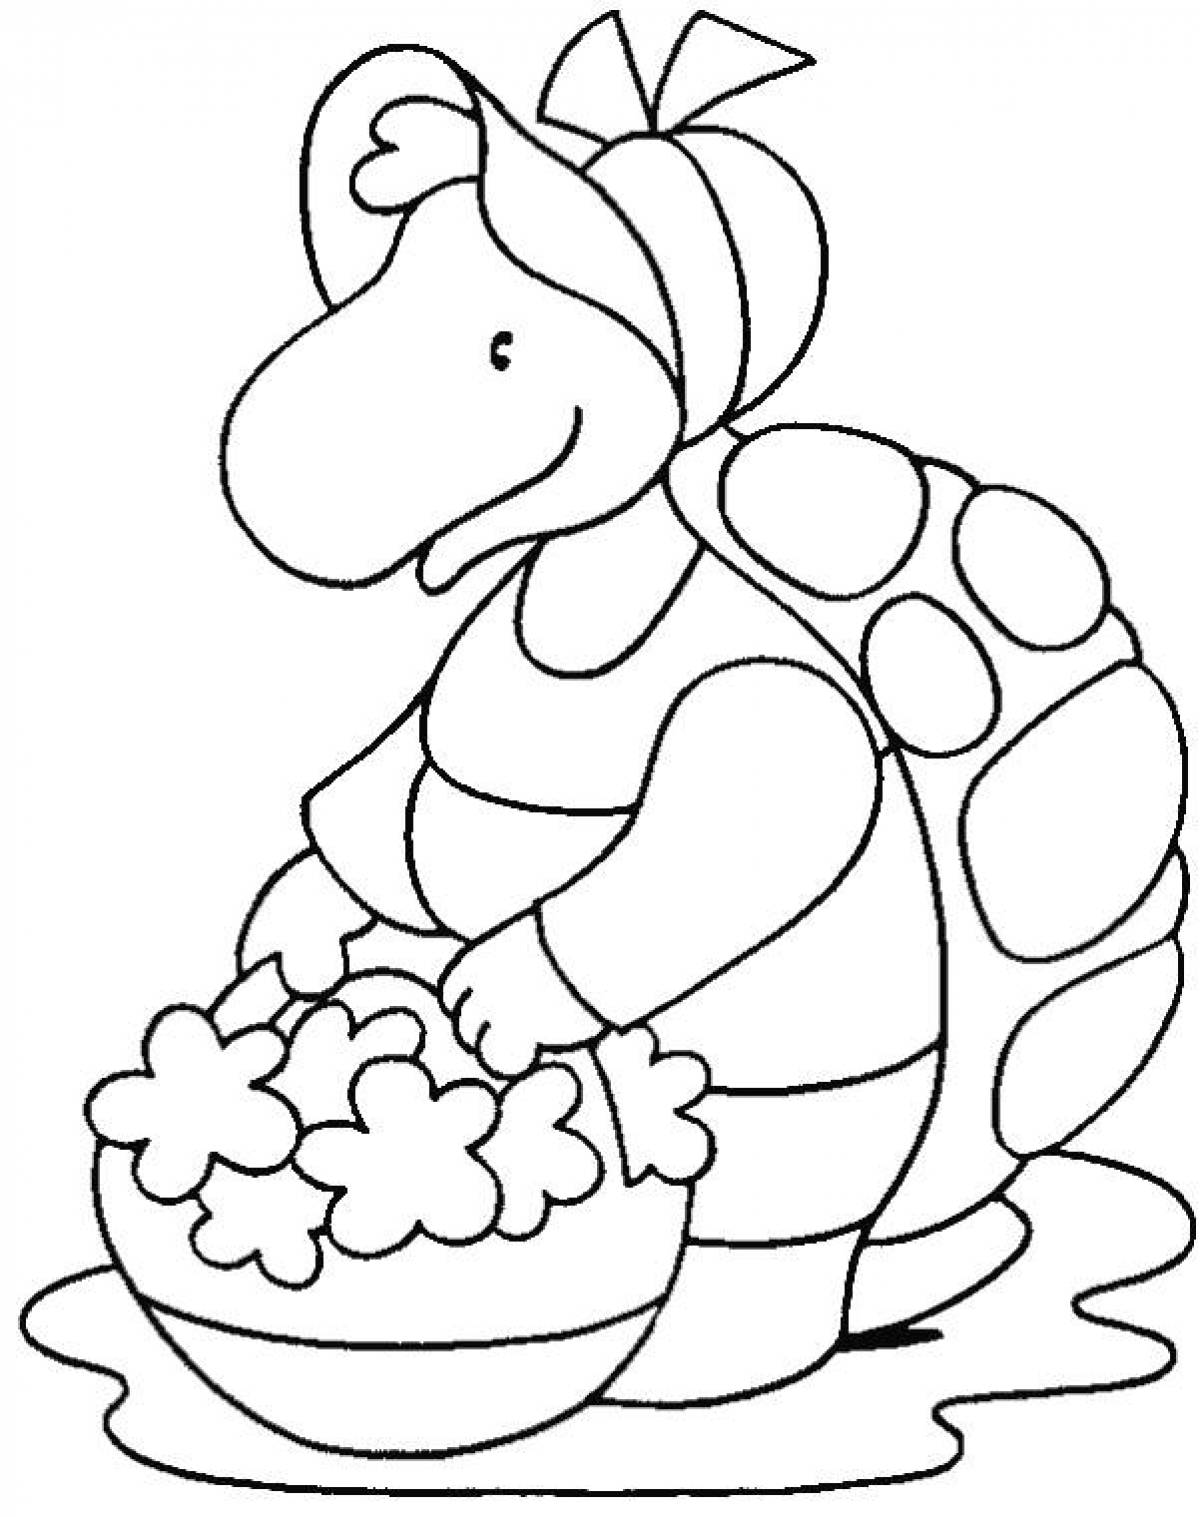 Turtle with a basket of flowers